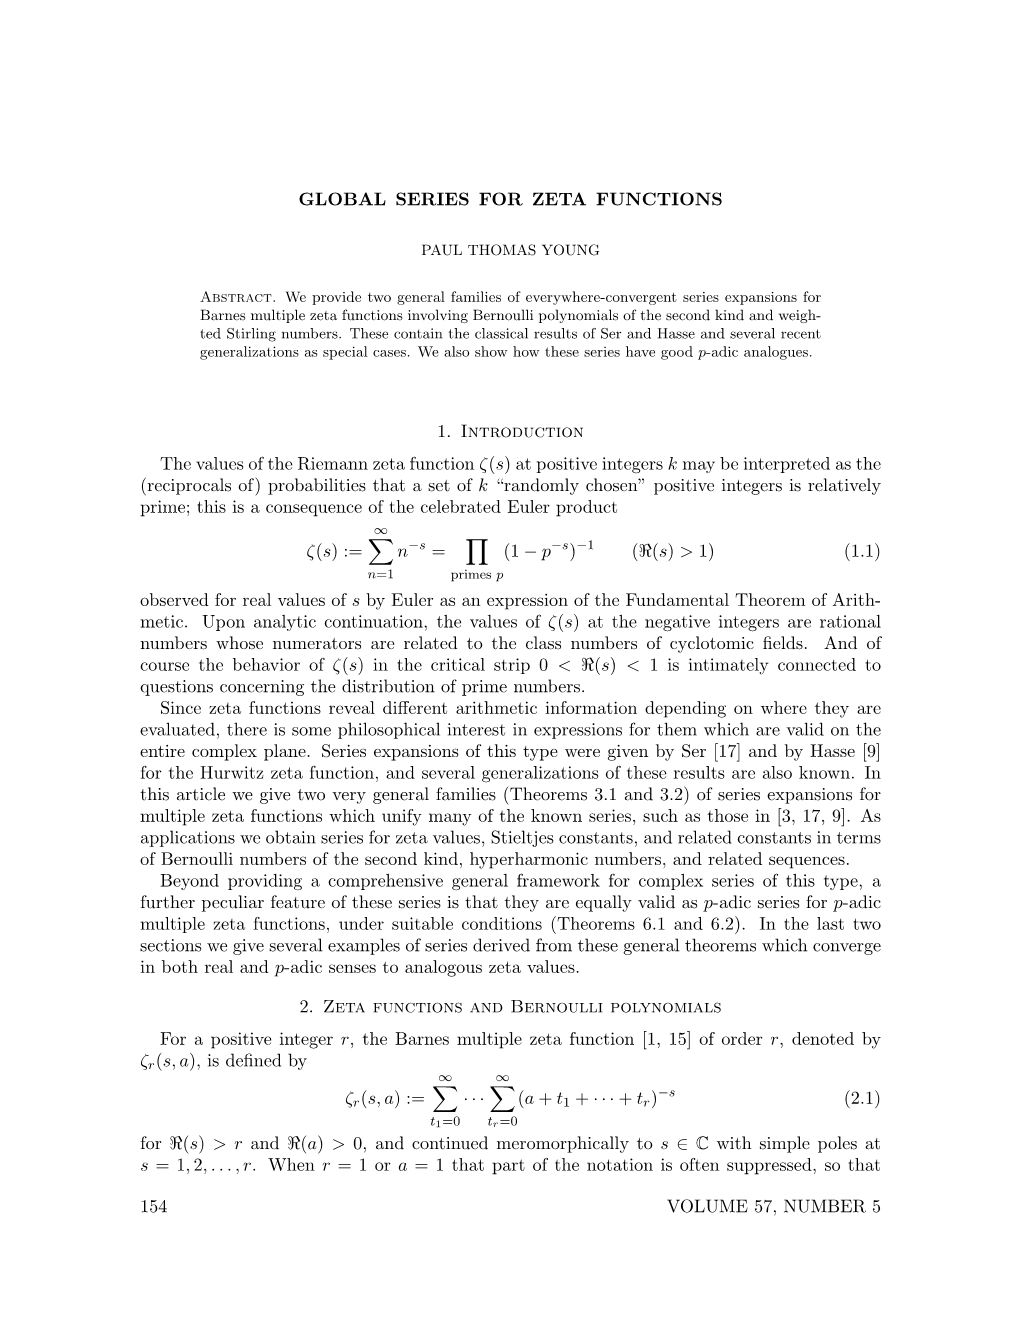 GLOBAL SERIES for ZETA FUNCTIONS 1. Introduction The